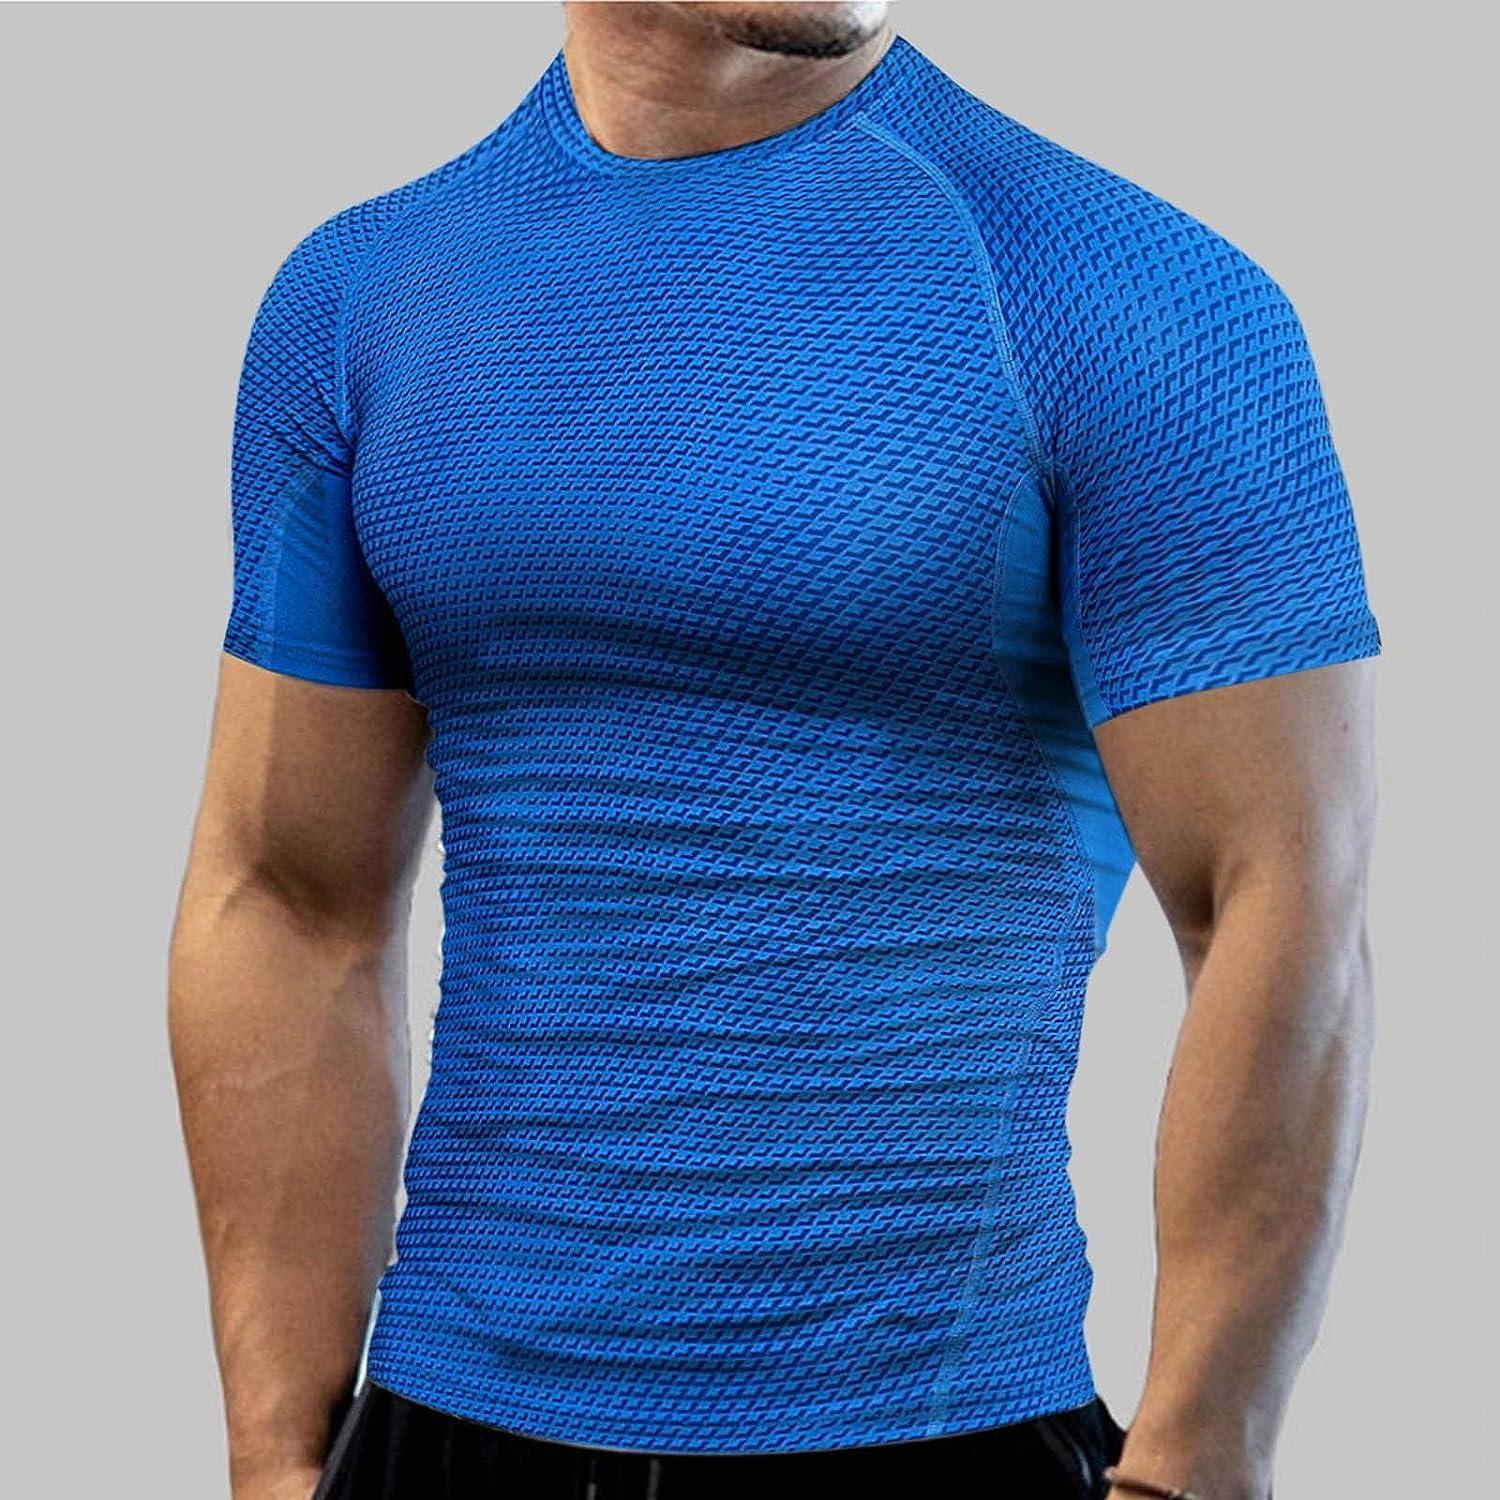 Mens Dress Shirts Patriotic Shirts for Men Loose Fit Quick Dry Fashion Mens  Shirt Muscle Gym Workout Athletic Shirt Z2-blue Large